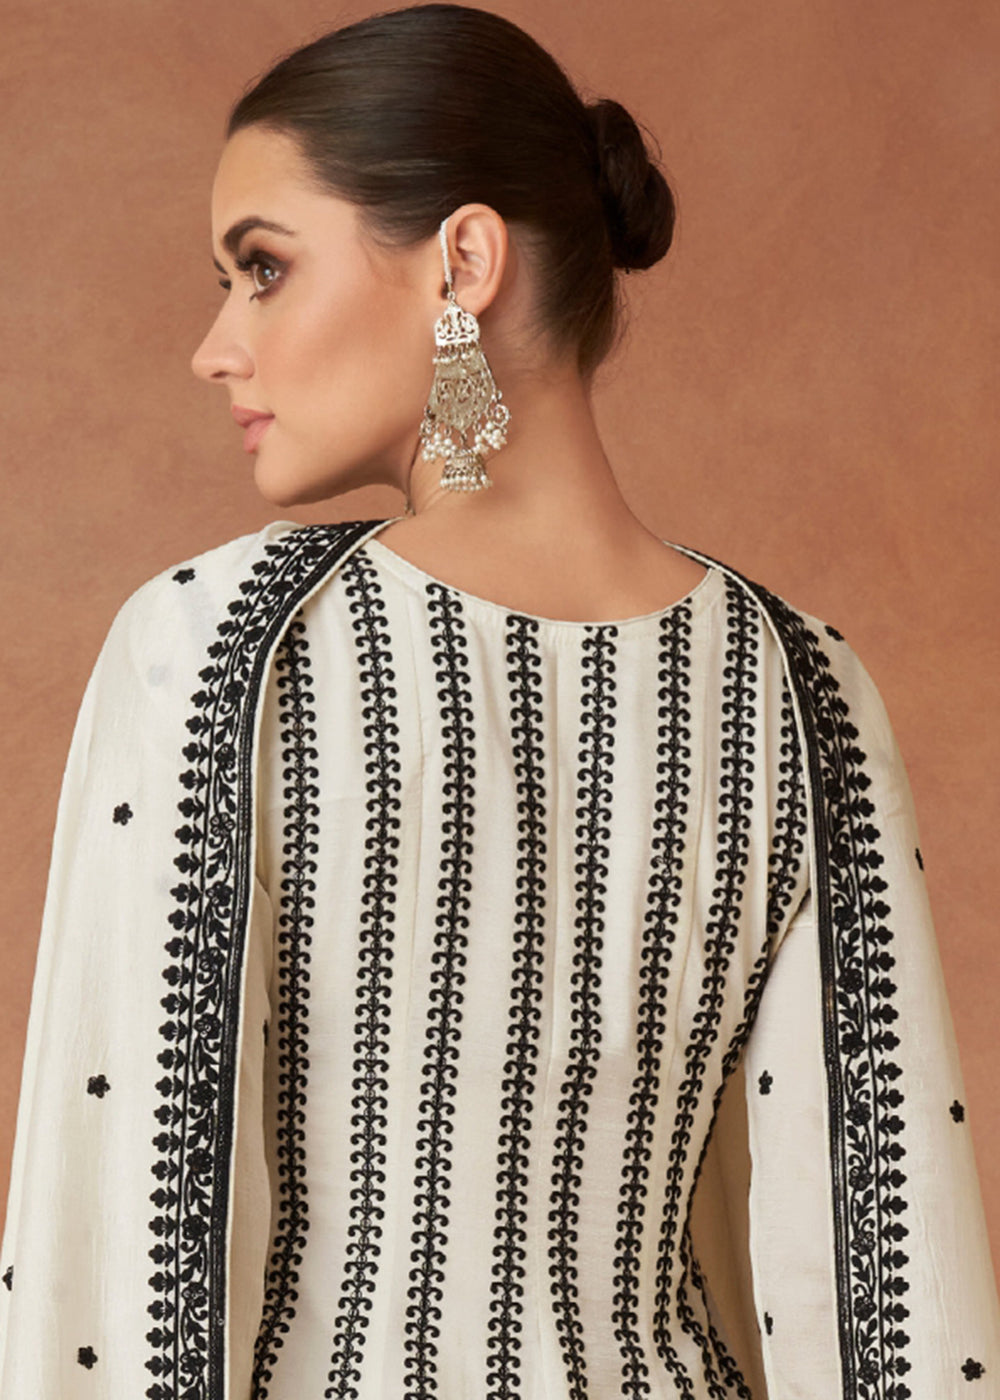 Shop Now Premium Silk Embroidered Off White Festive Sharara Suit Online at Empress Clothing in USA, UK, Canada, Italy & Worldwide. 